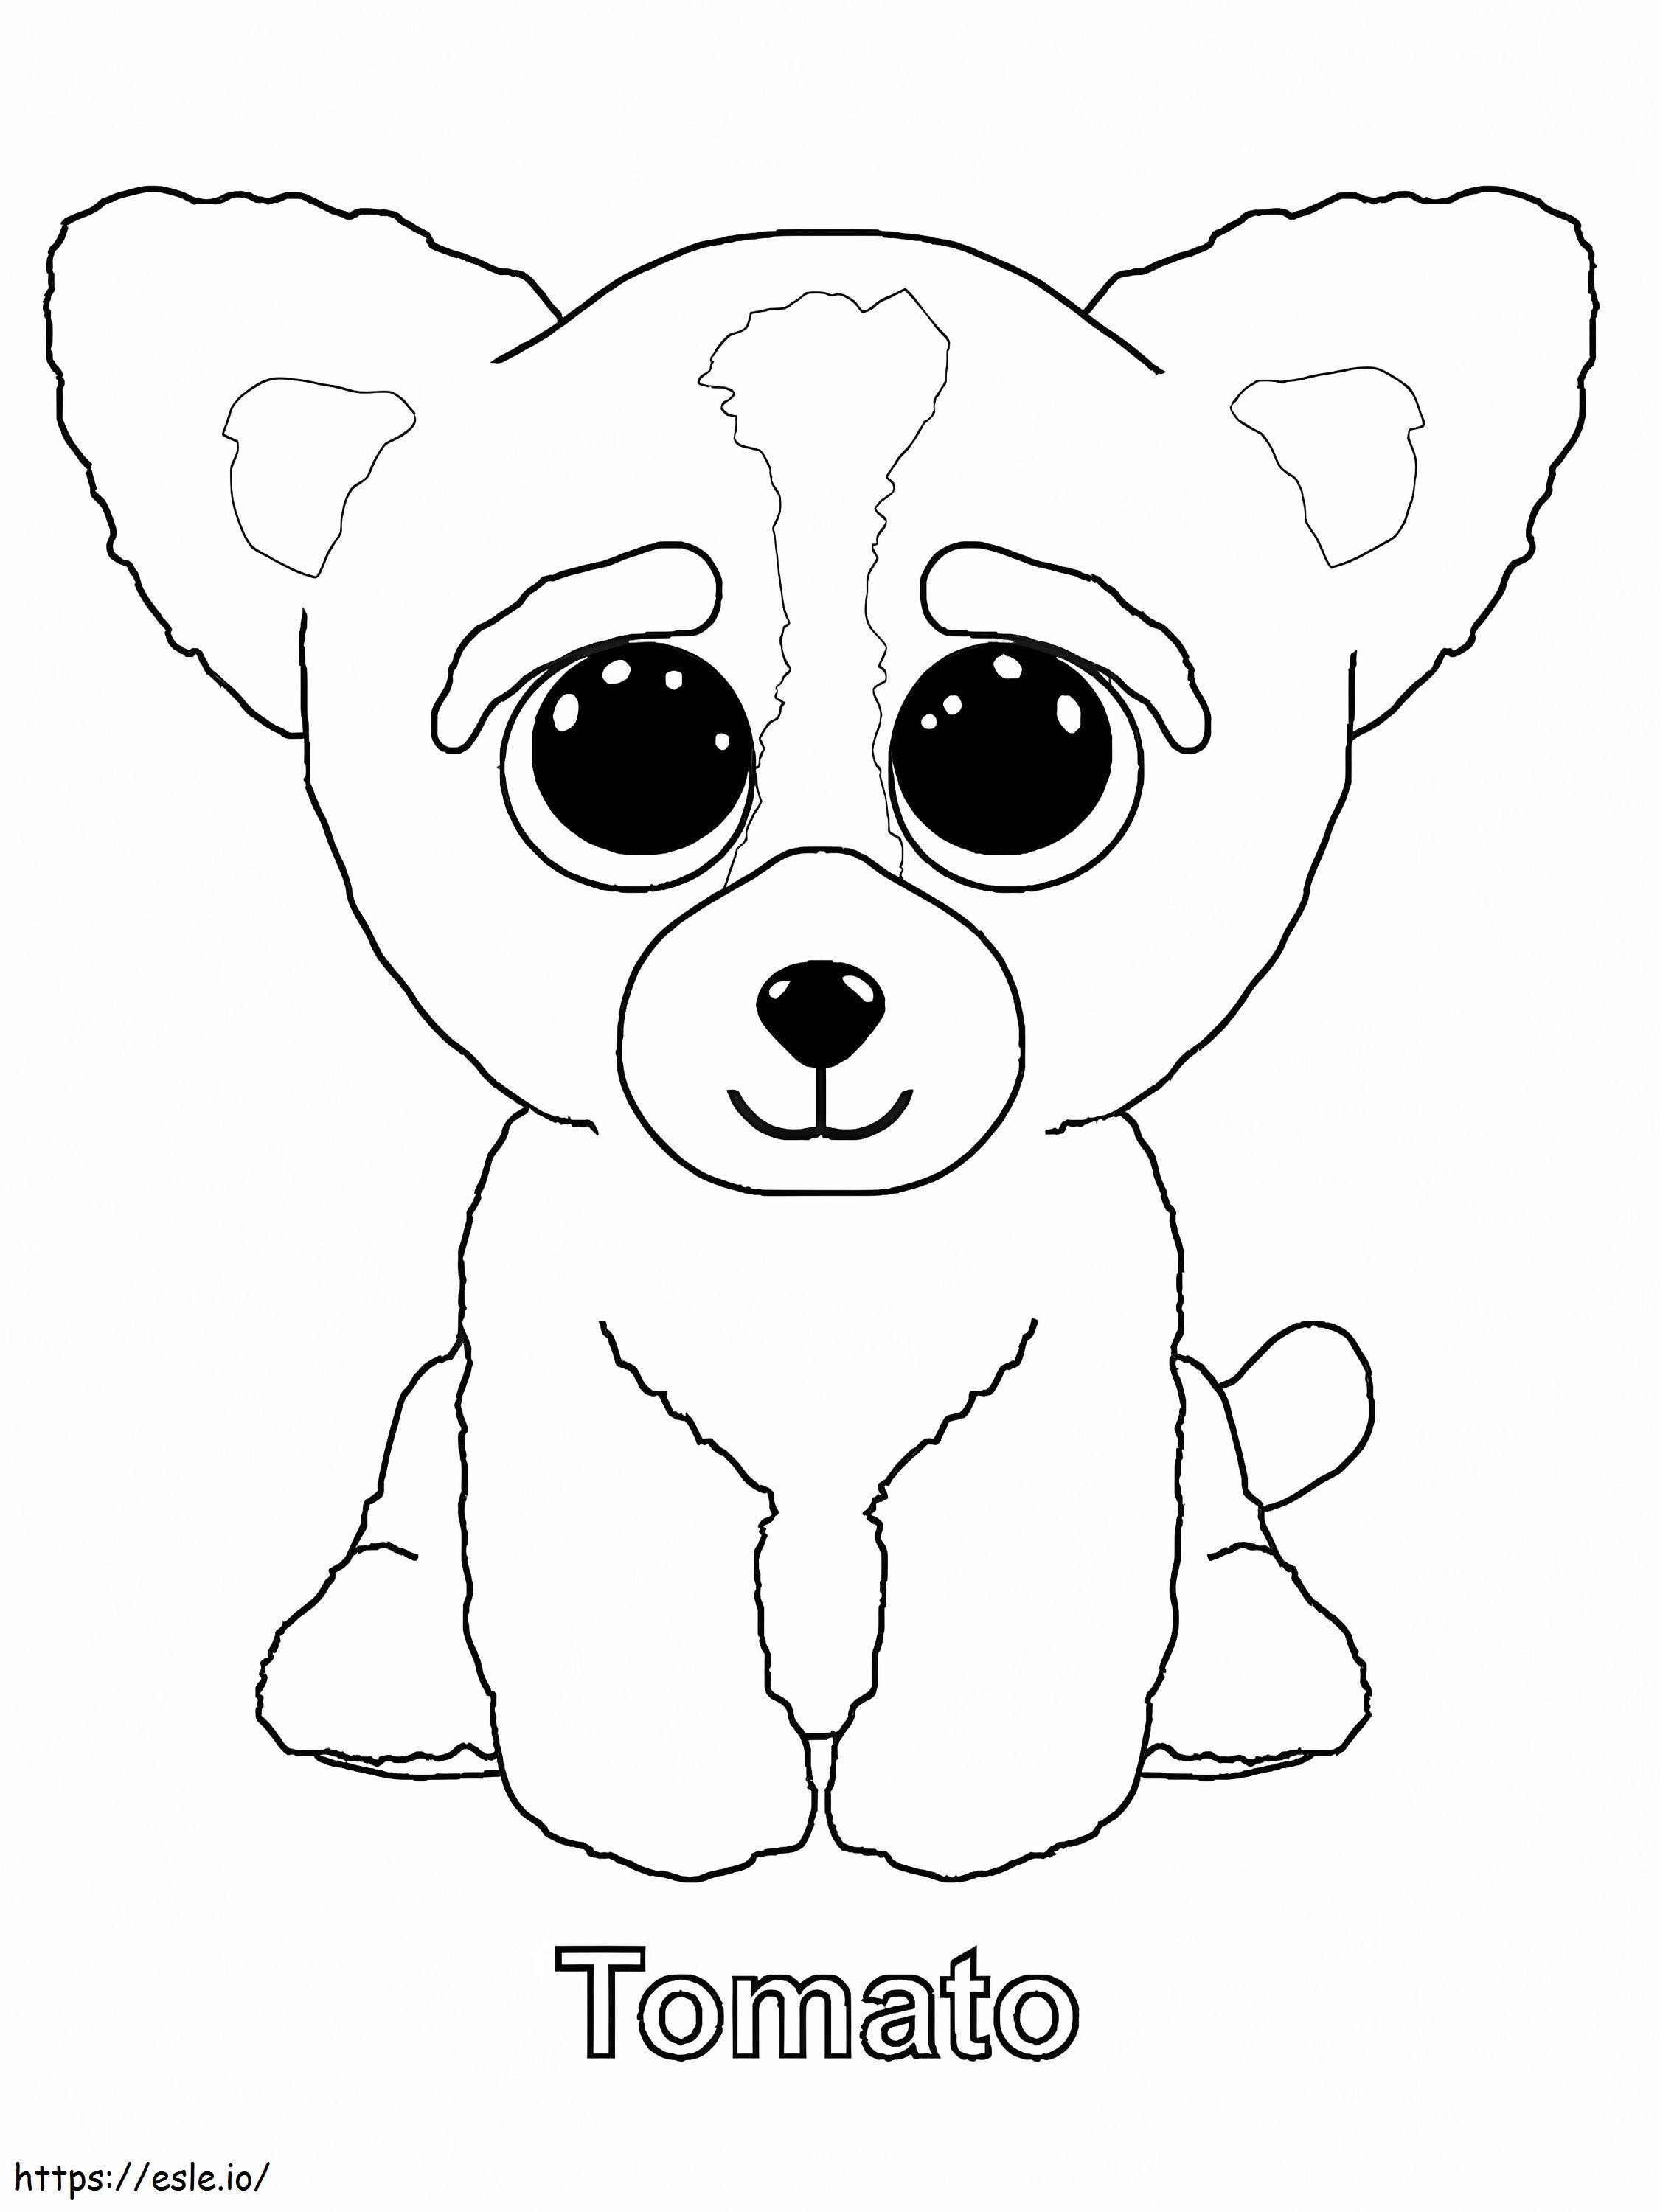 1583894019 Printable Beanie Boo Monkey Only Ty To Print Printables Spike Alligator Where Buy Boos coloring page